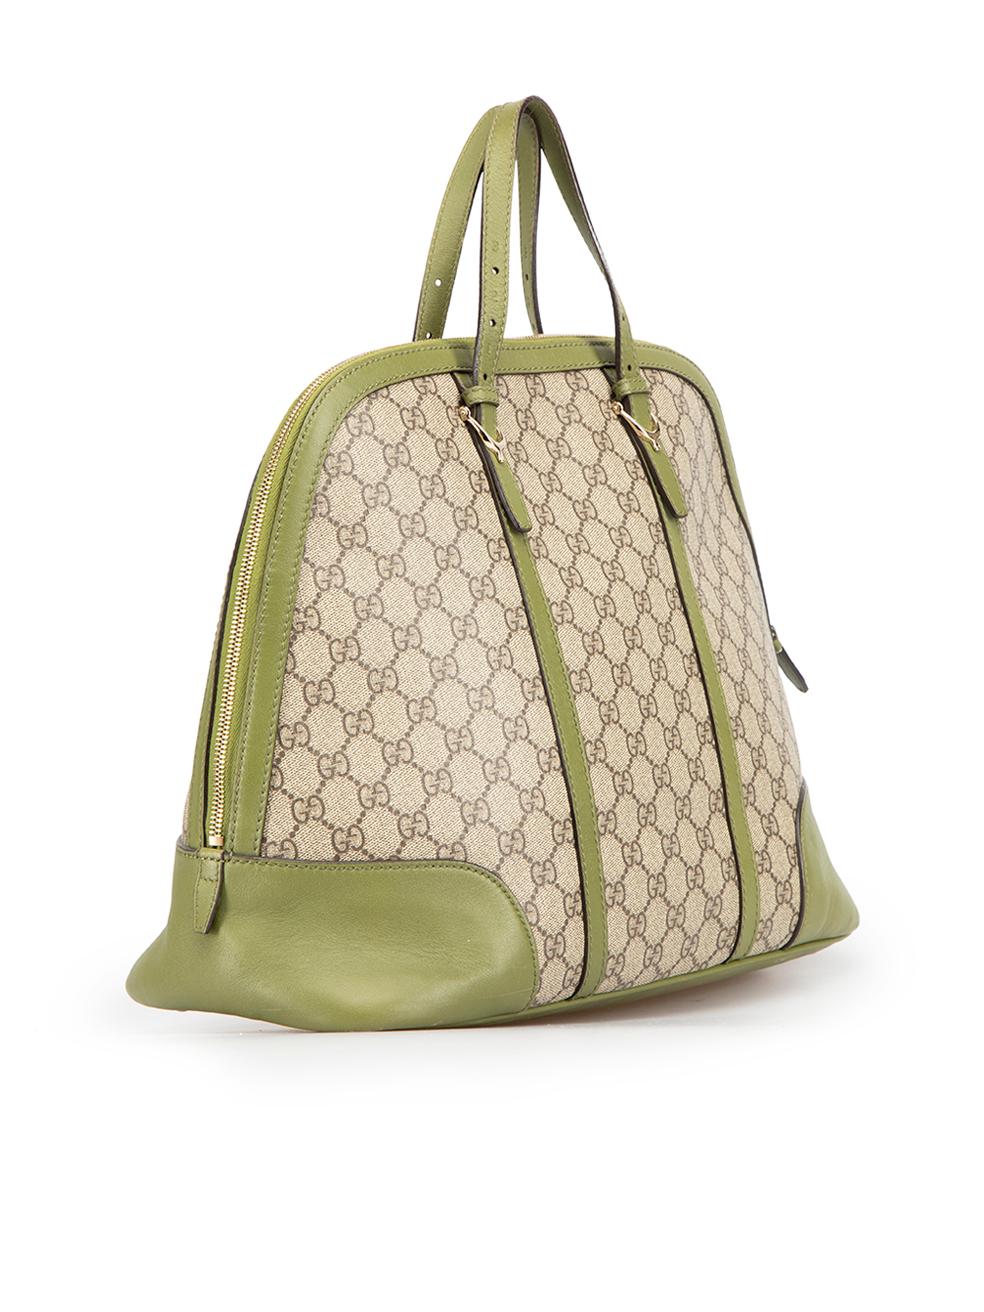 CONDITION is Very good. Minimal wear to bag is evident. Minimal wear to the base and four corners with scuff marks on this used Gucci designer resale item. This item comes with original dust bag.



Details


Green and beige

Leather and